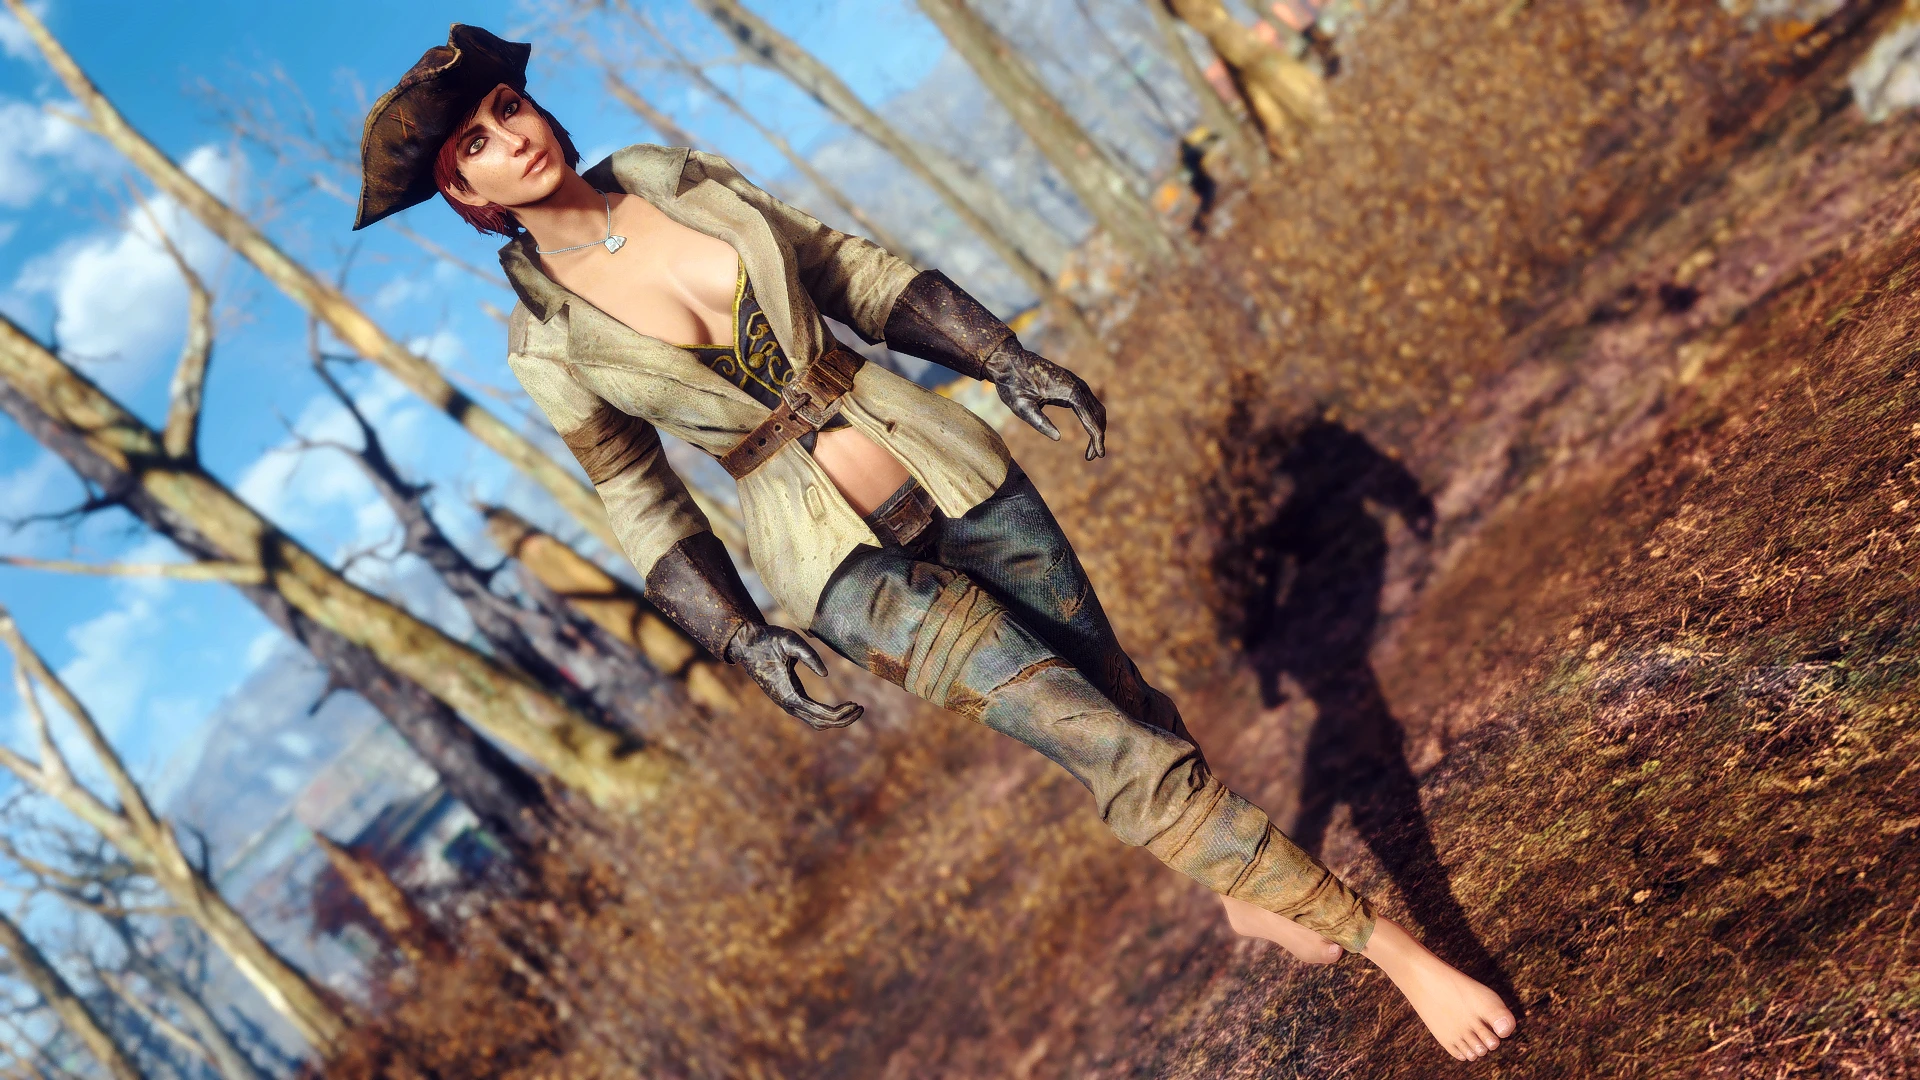 The wild wasteland fallout 4 фото 78